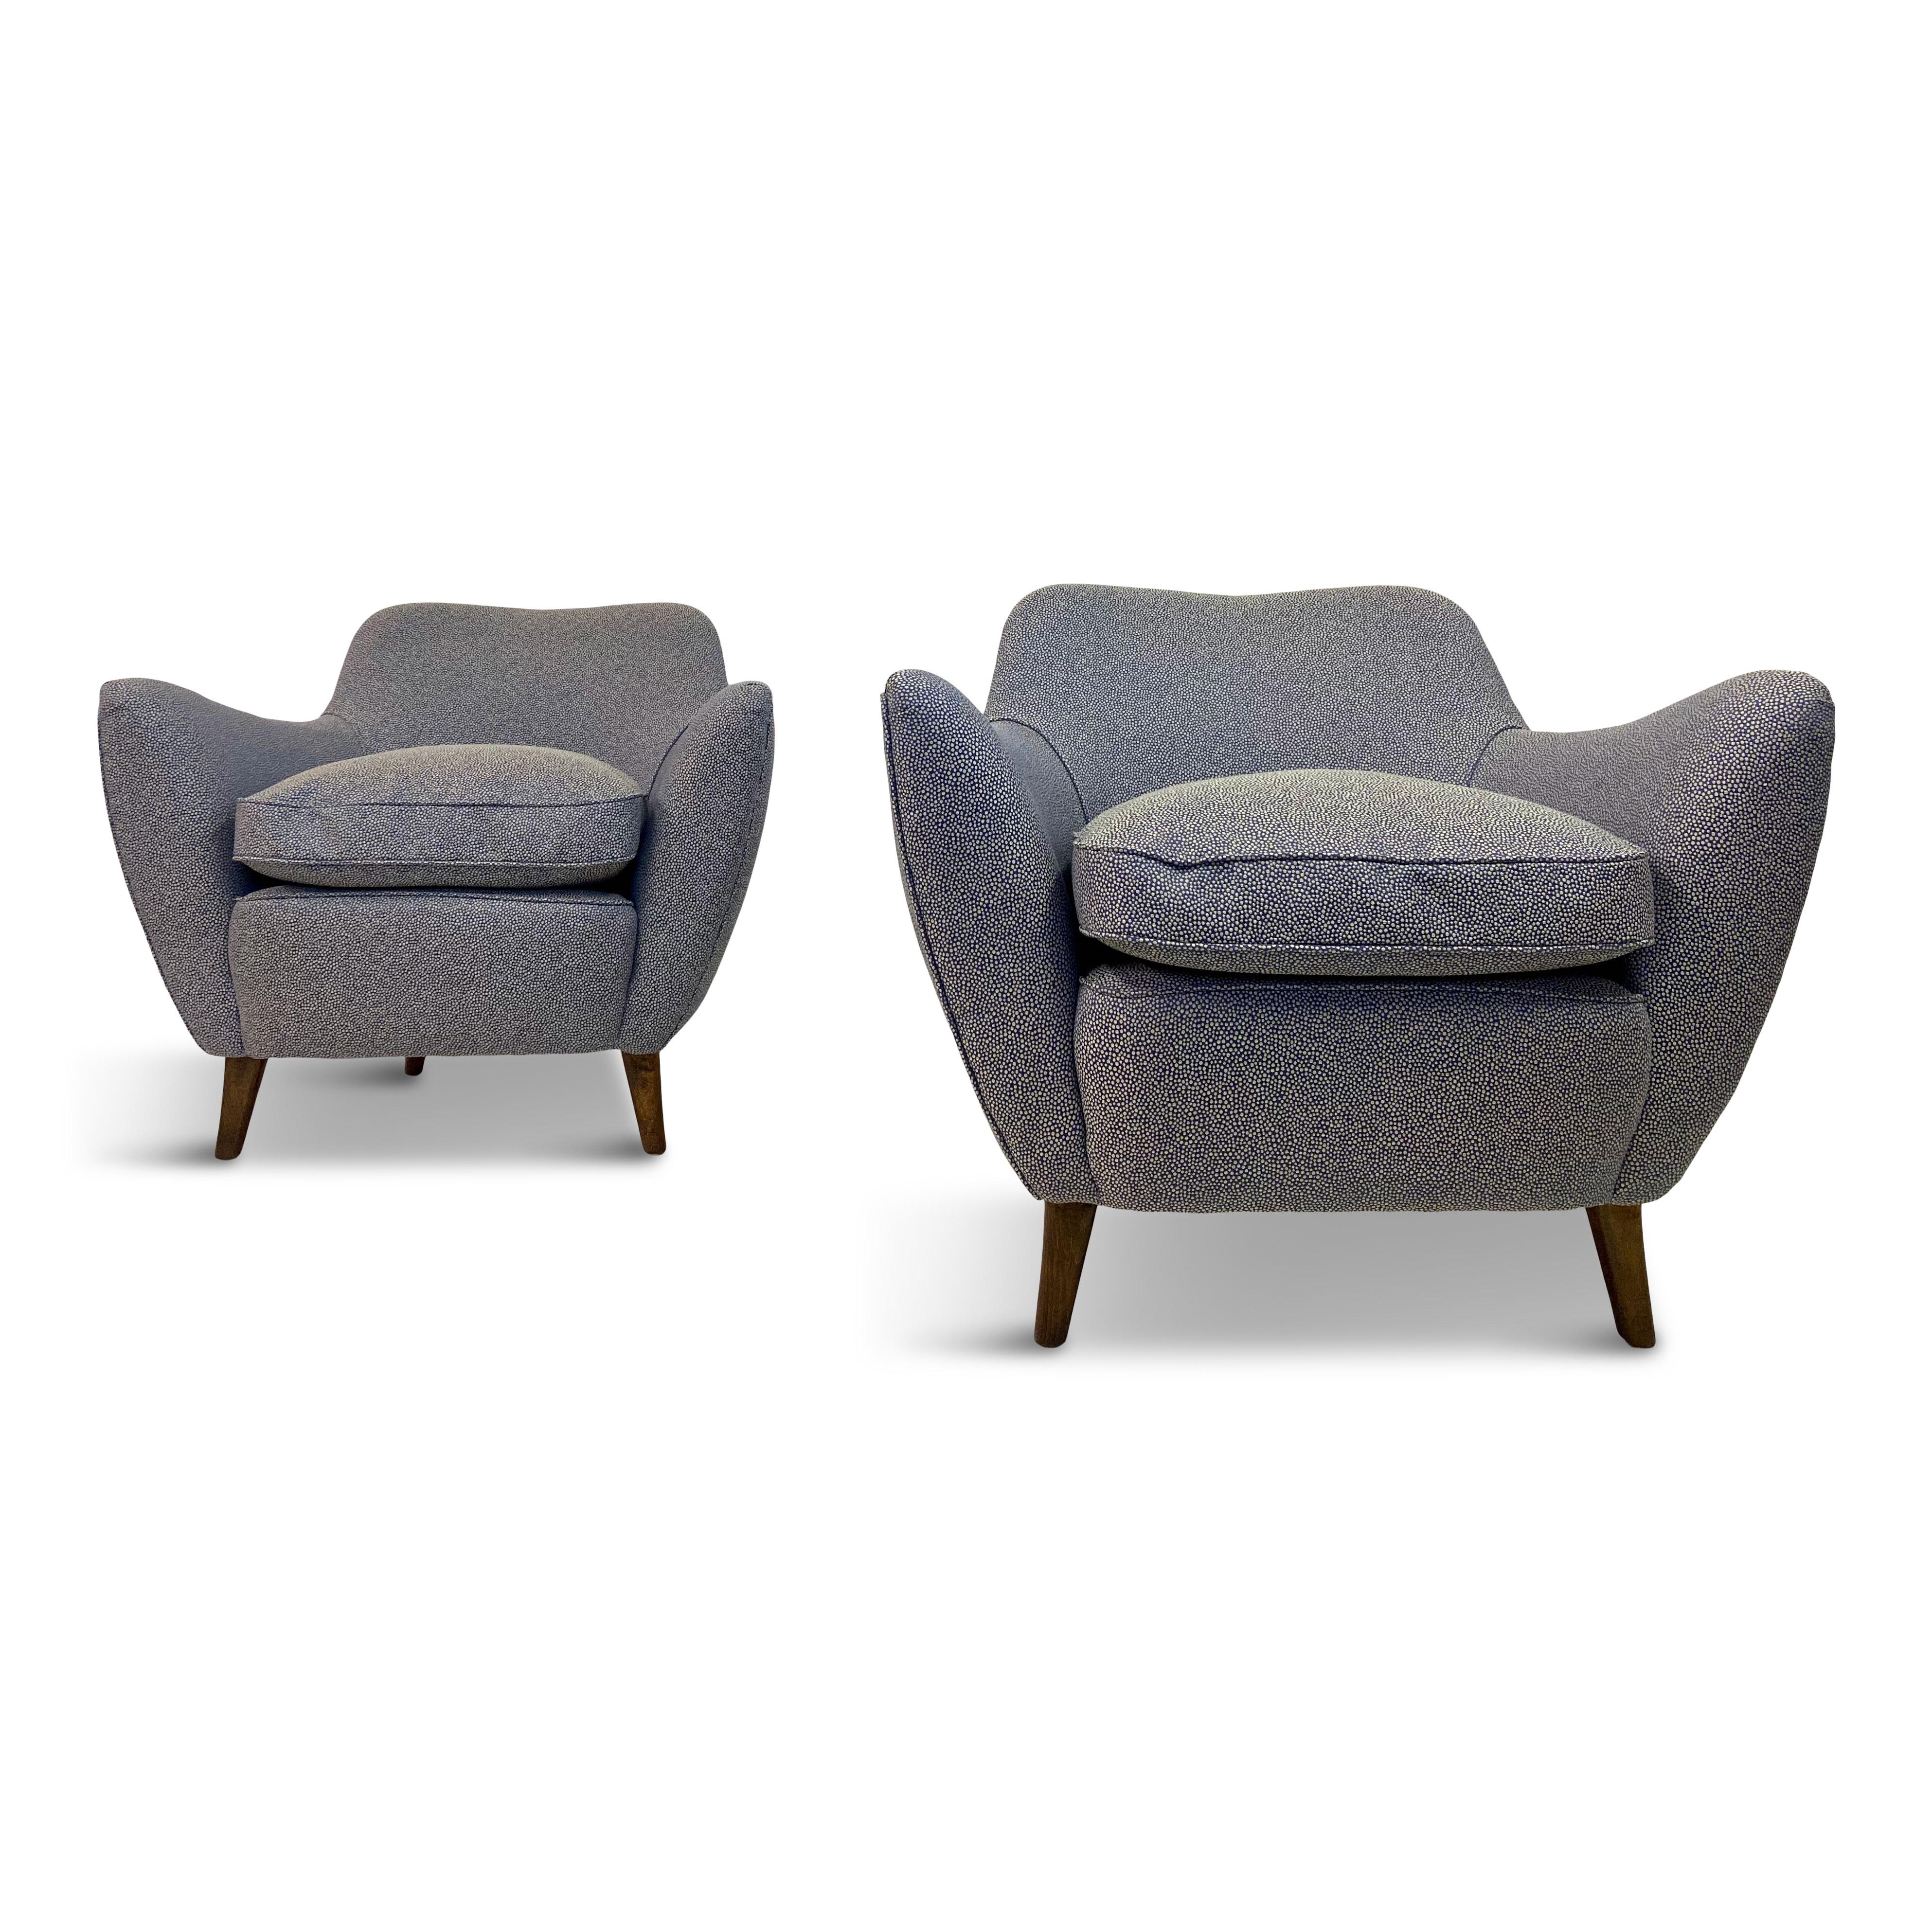 A pair of armchairs

In the style of Guglielmo Veronesi

Newly upholstered in Jim Thompson fabric

Italy, 1950s.